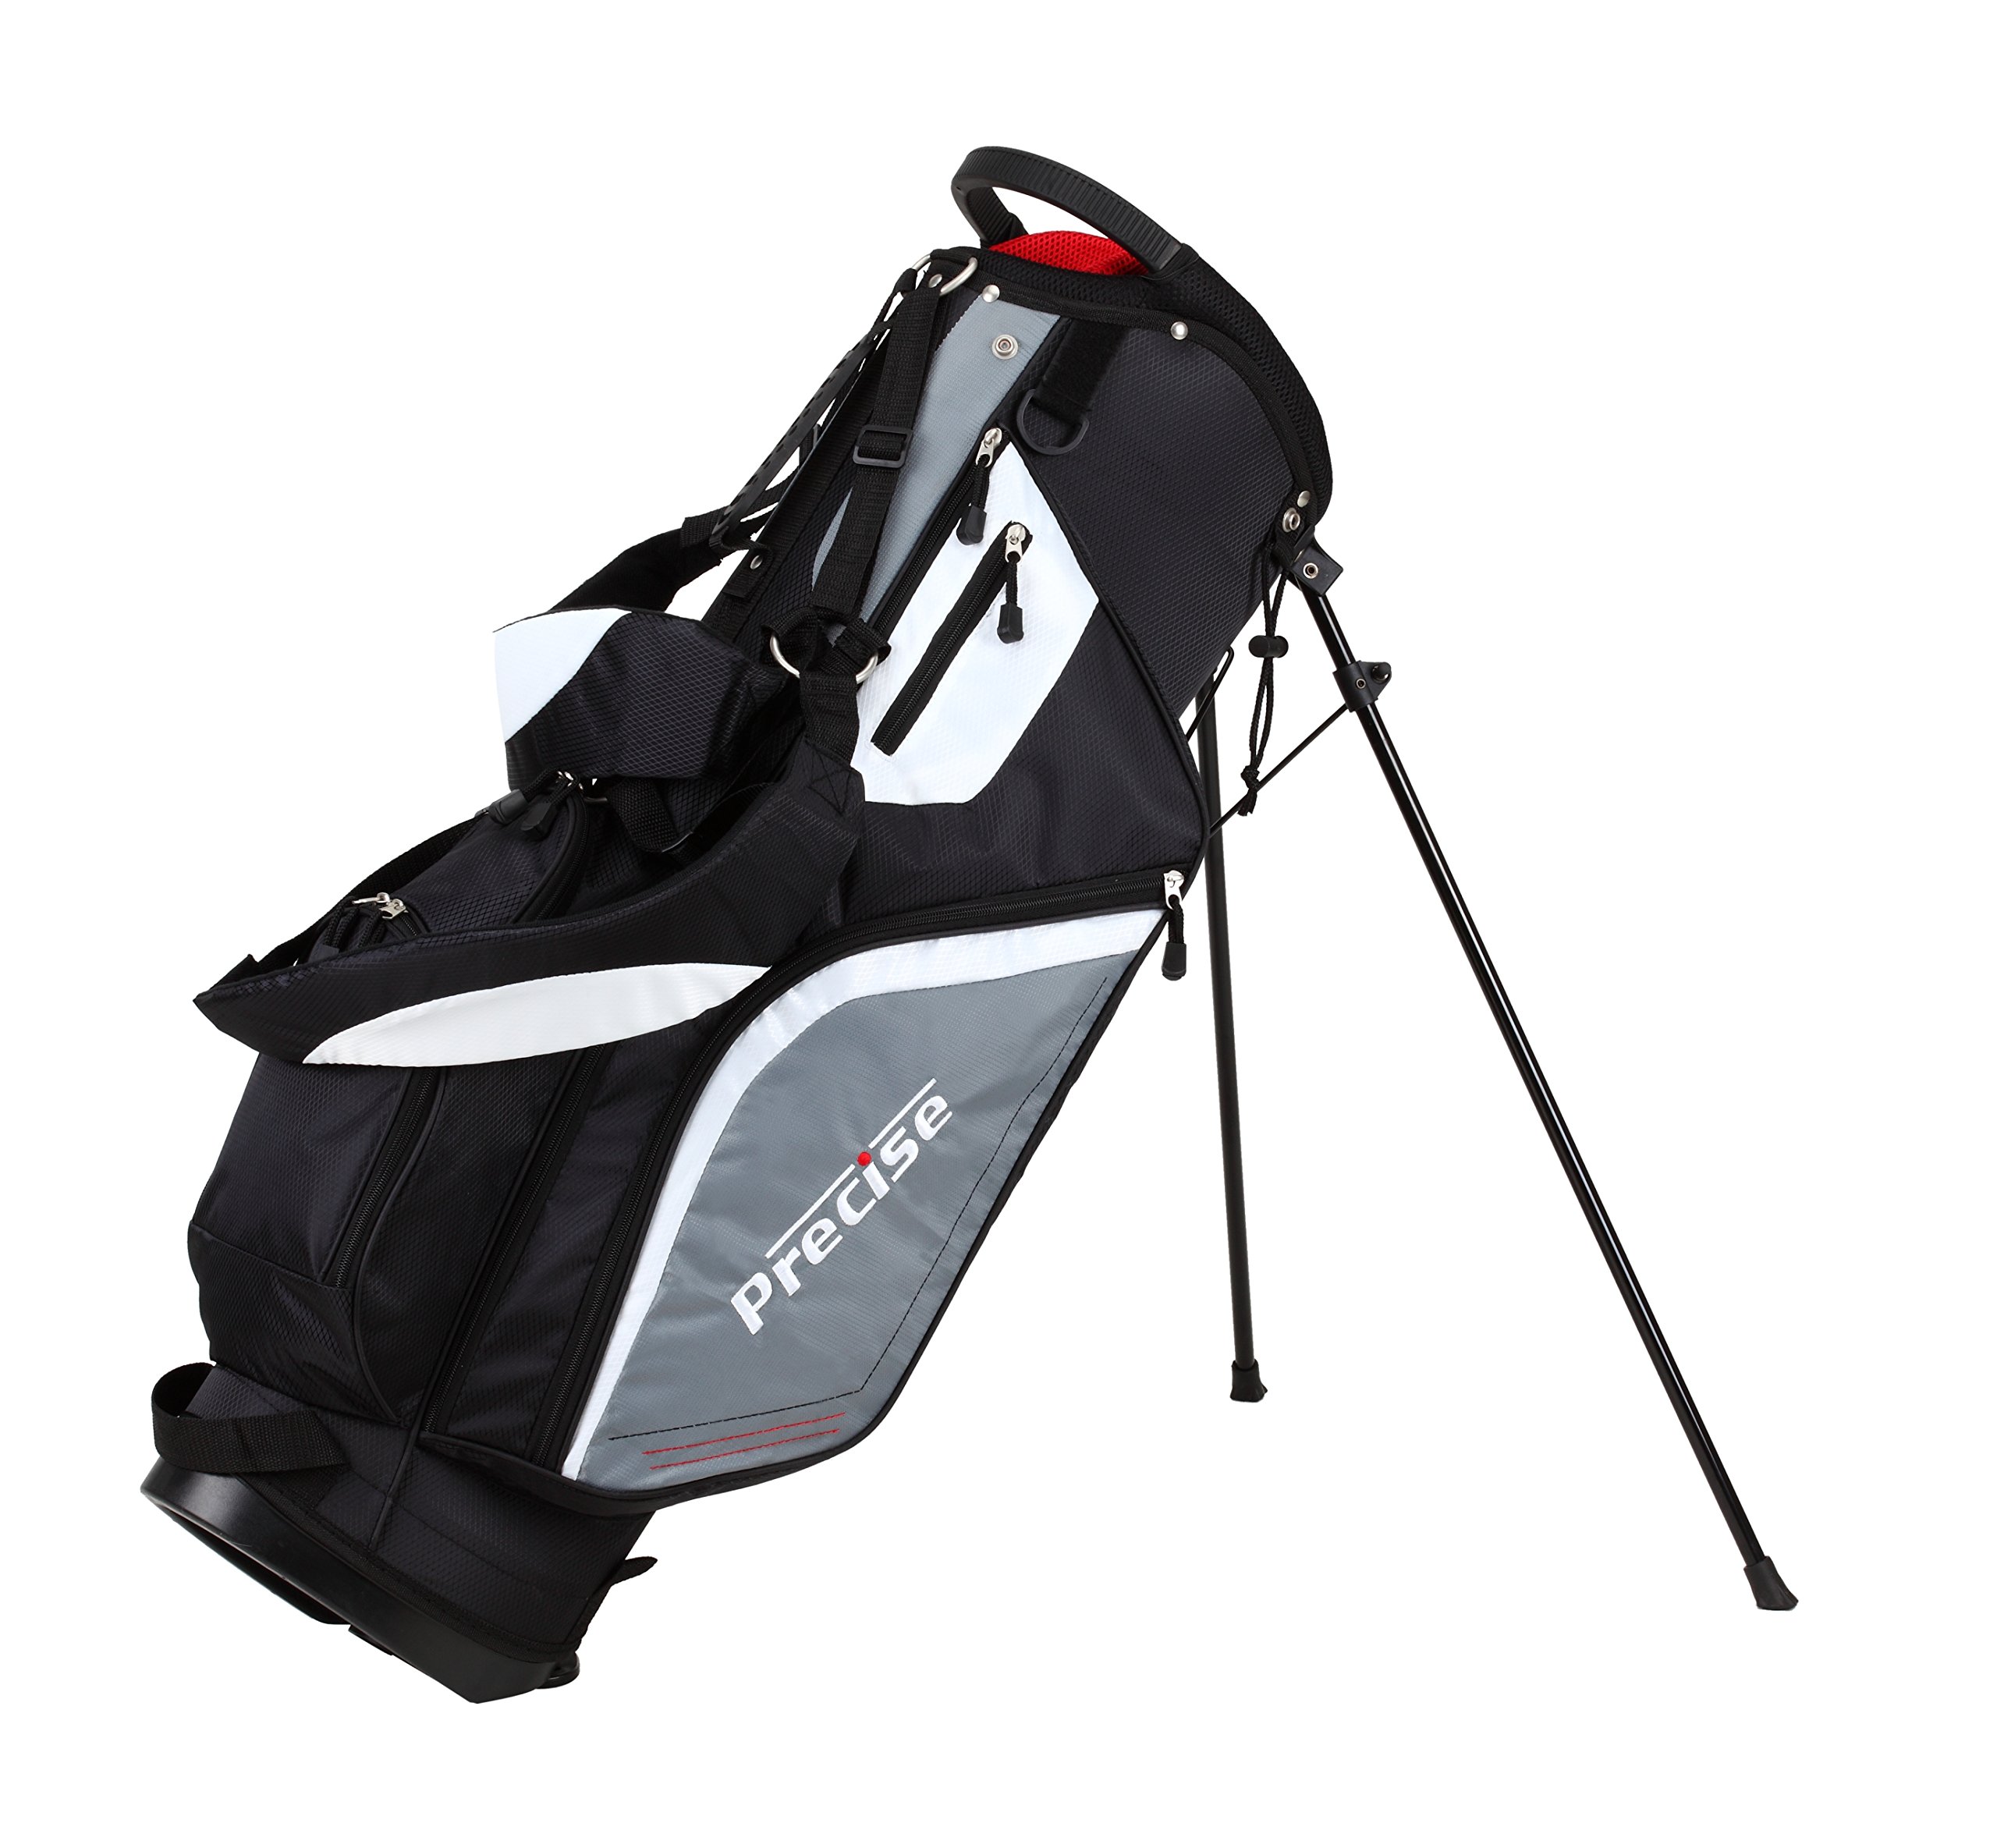 Precise M5 Men's Complete Golf Clubs Package Set Includes Titanium Driver, S.S. Fairway, S.S. Hybrid, S.S. 5-PW Irons, Putter, Stand Bag, 3 H/C's